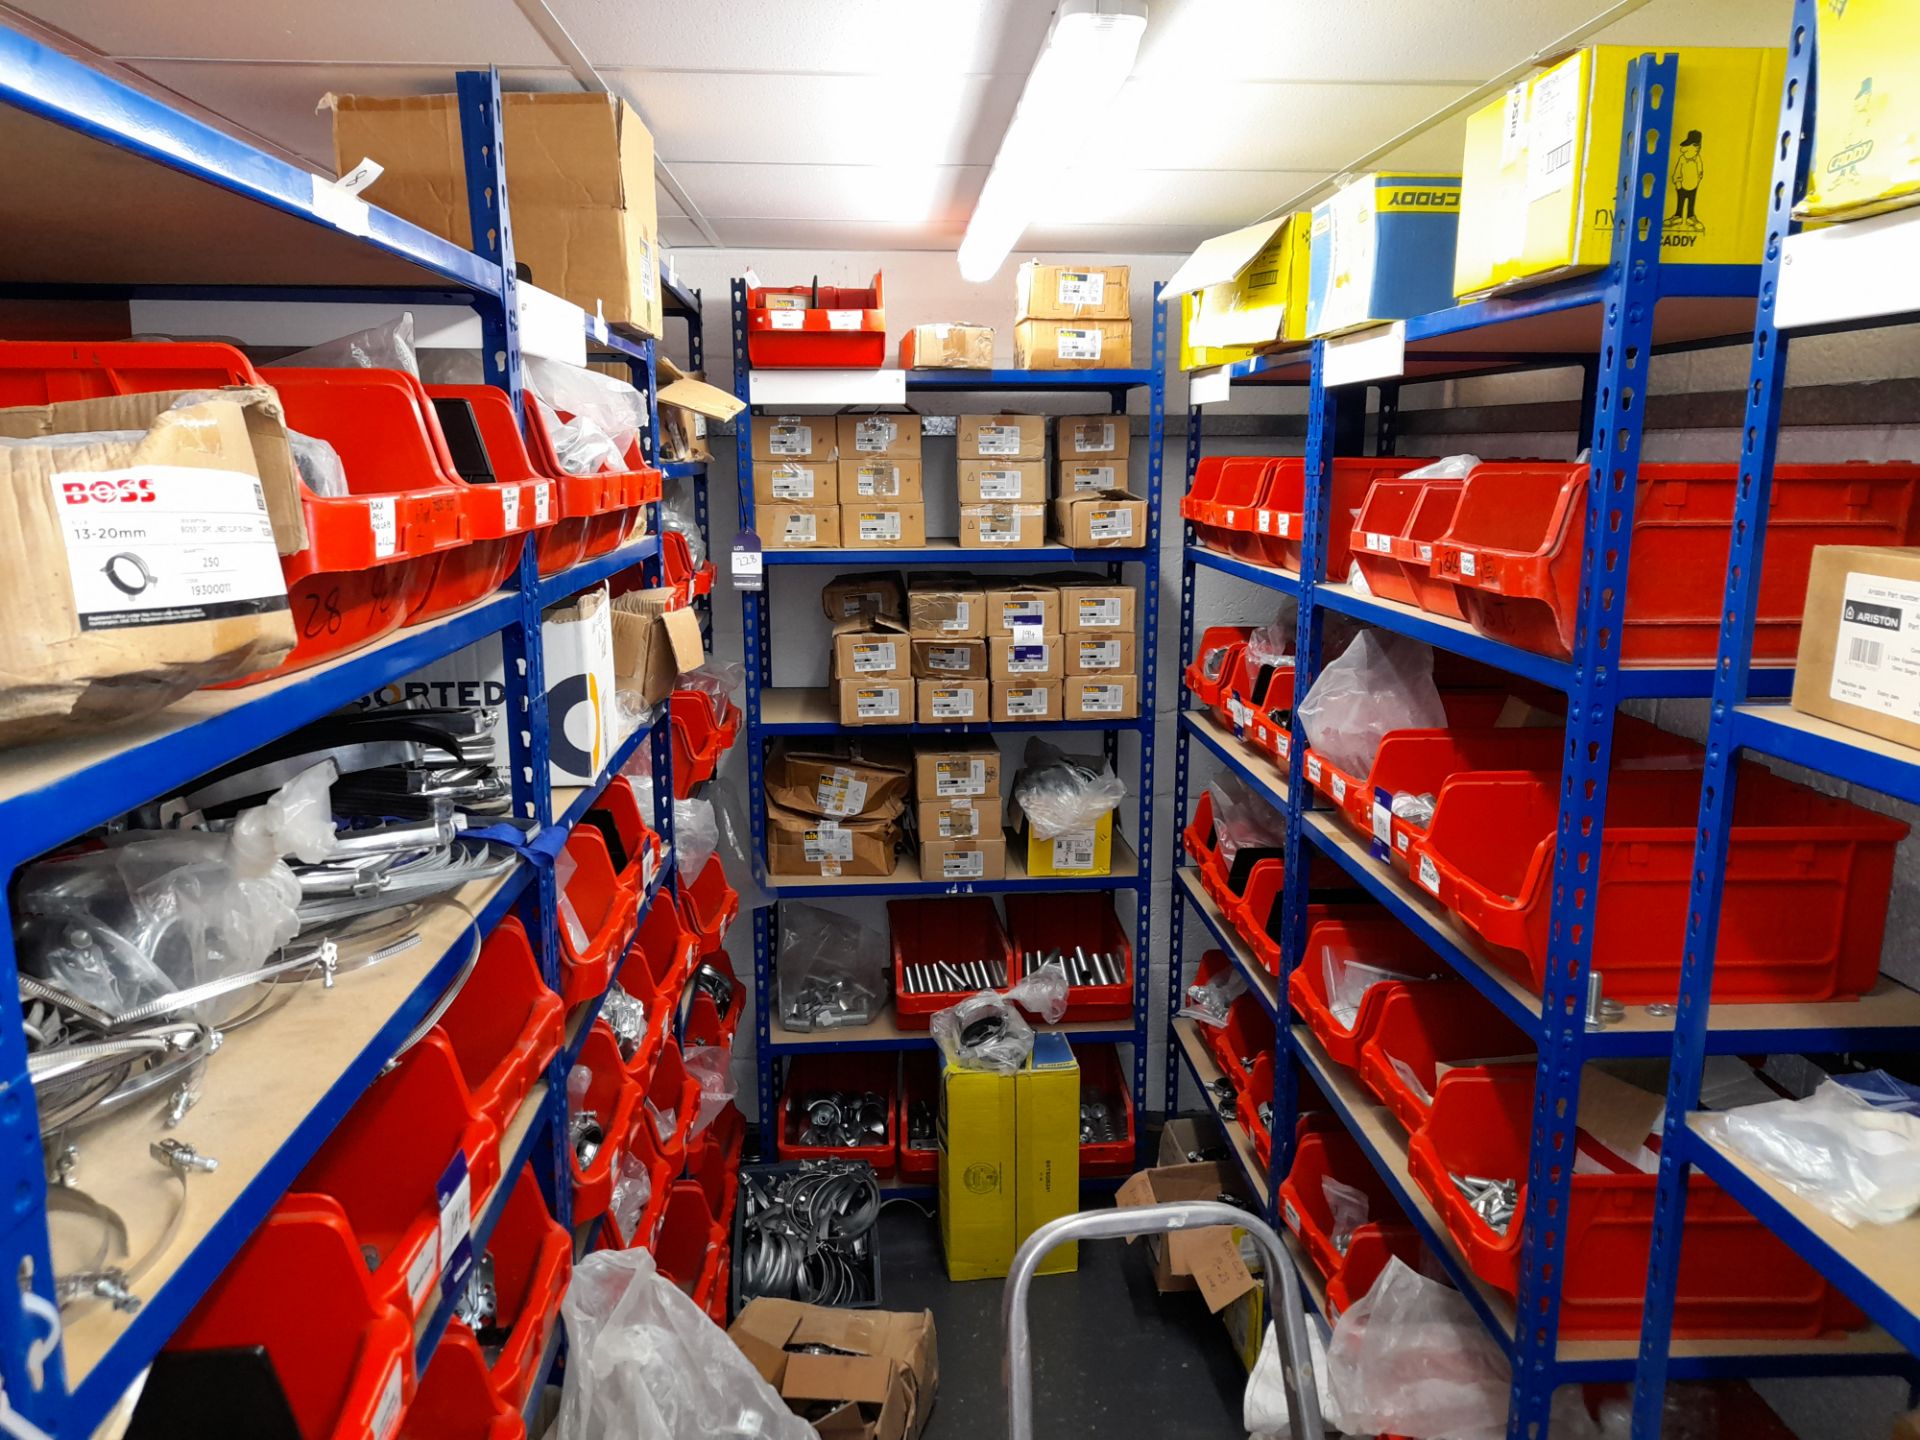 Large Quantity of stock to 13 bays, bolts, nuts, clamps, bracketry, fittings, washers, plastic